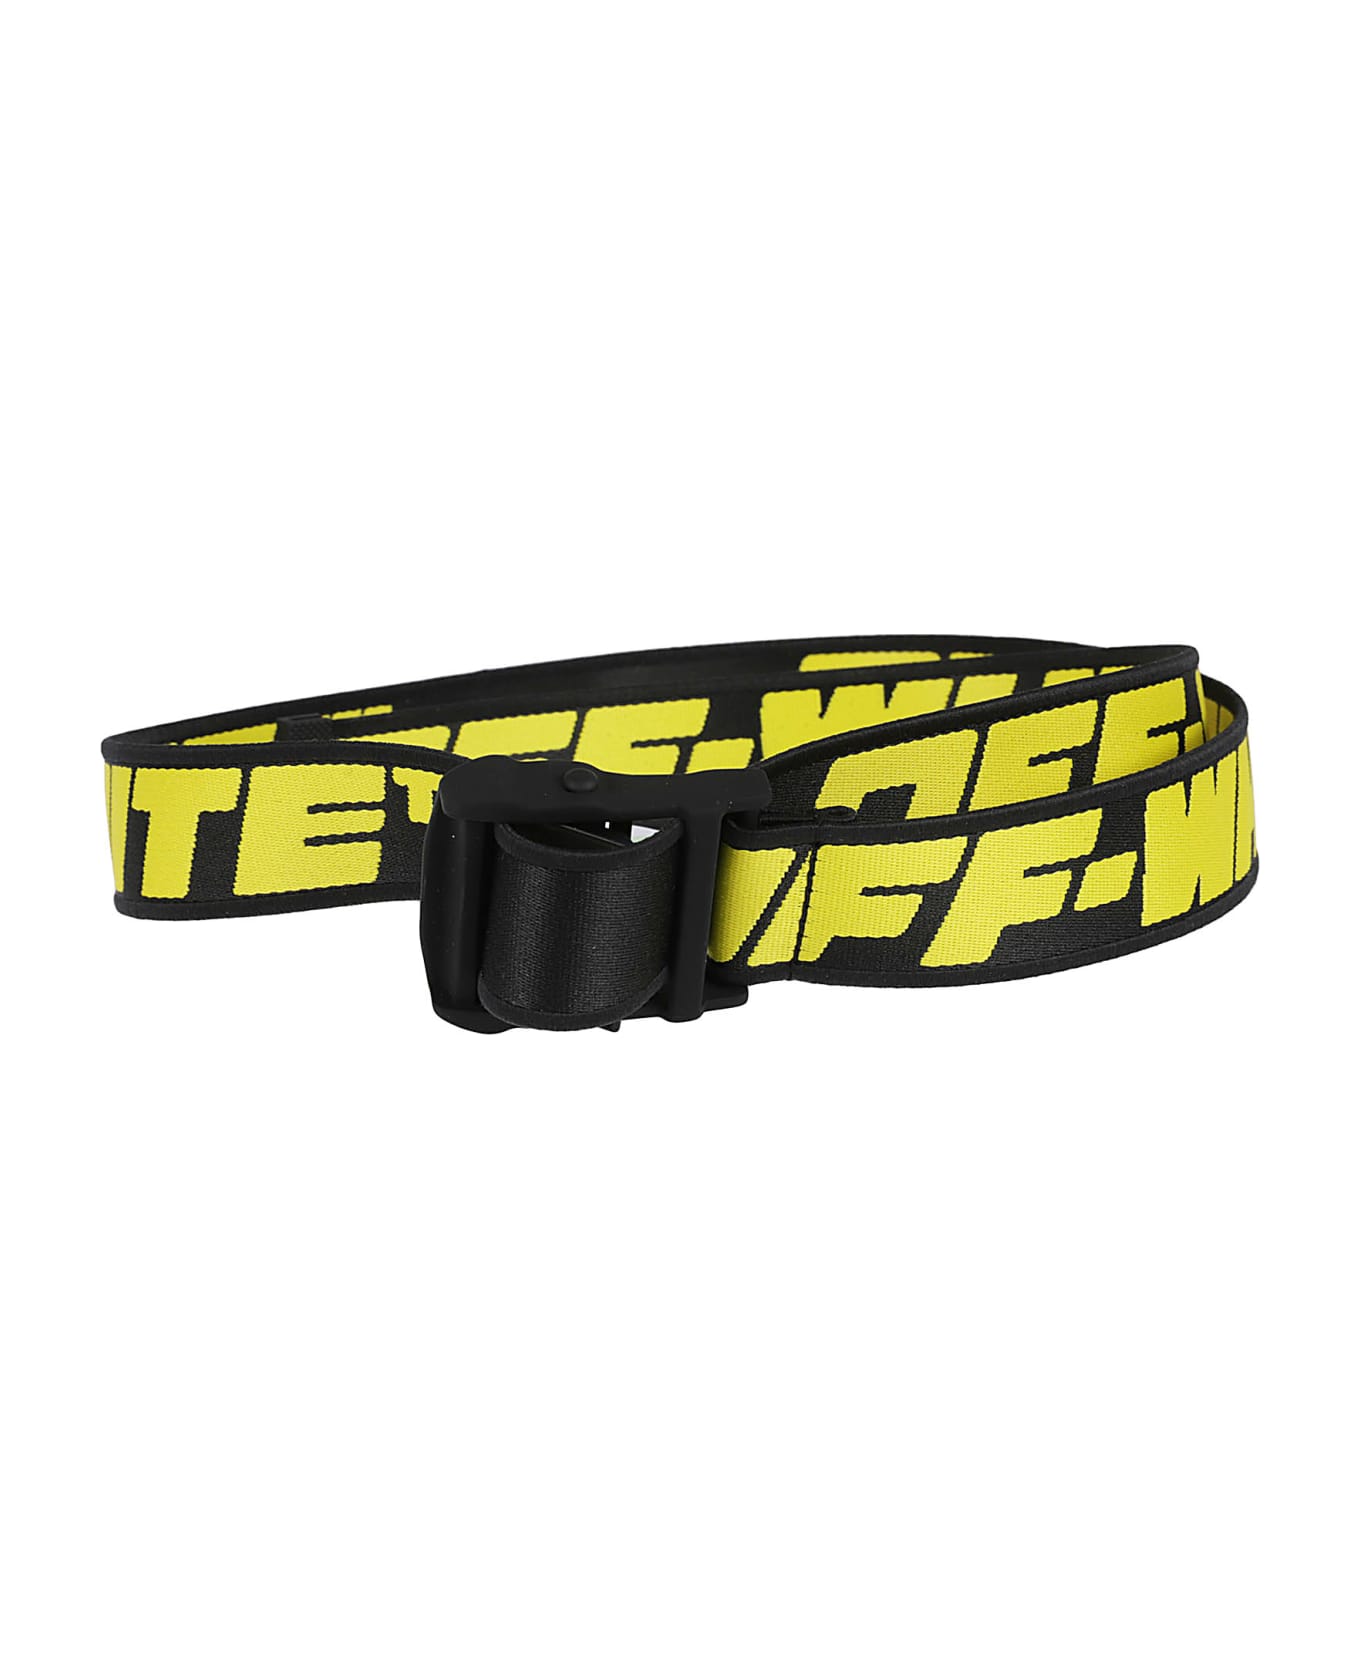 Off-White Industrial Tape Belt - Black/Yellow